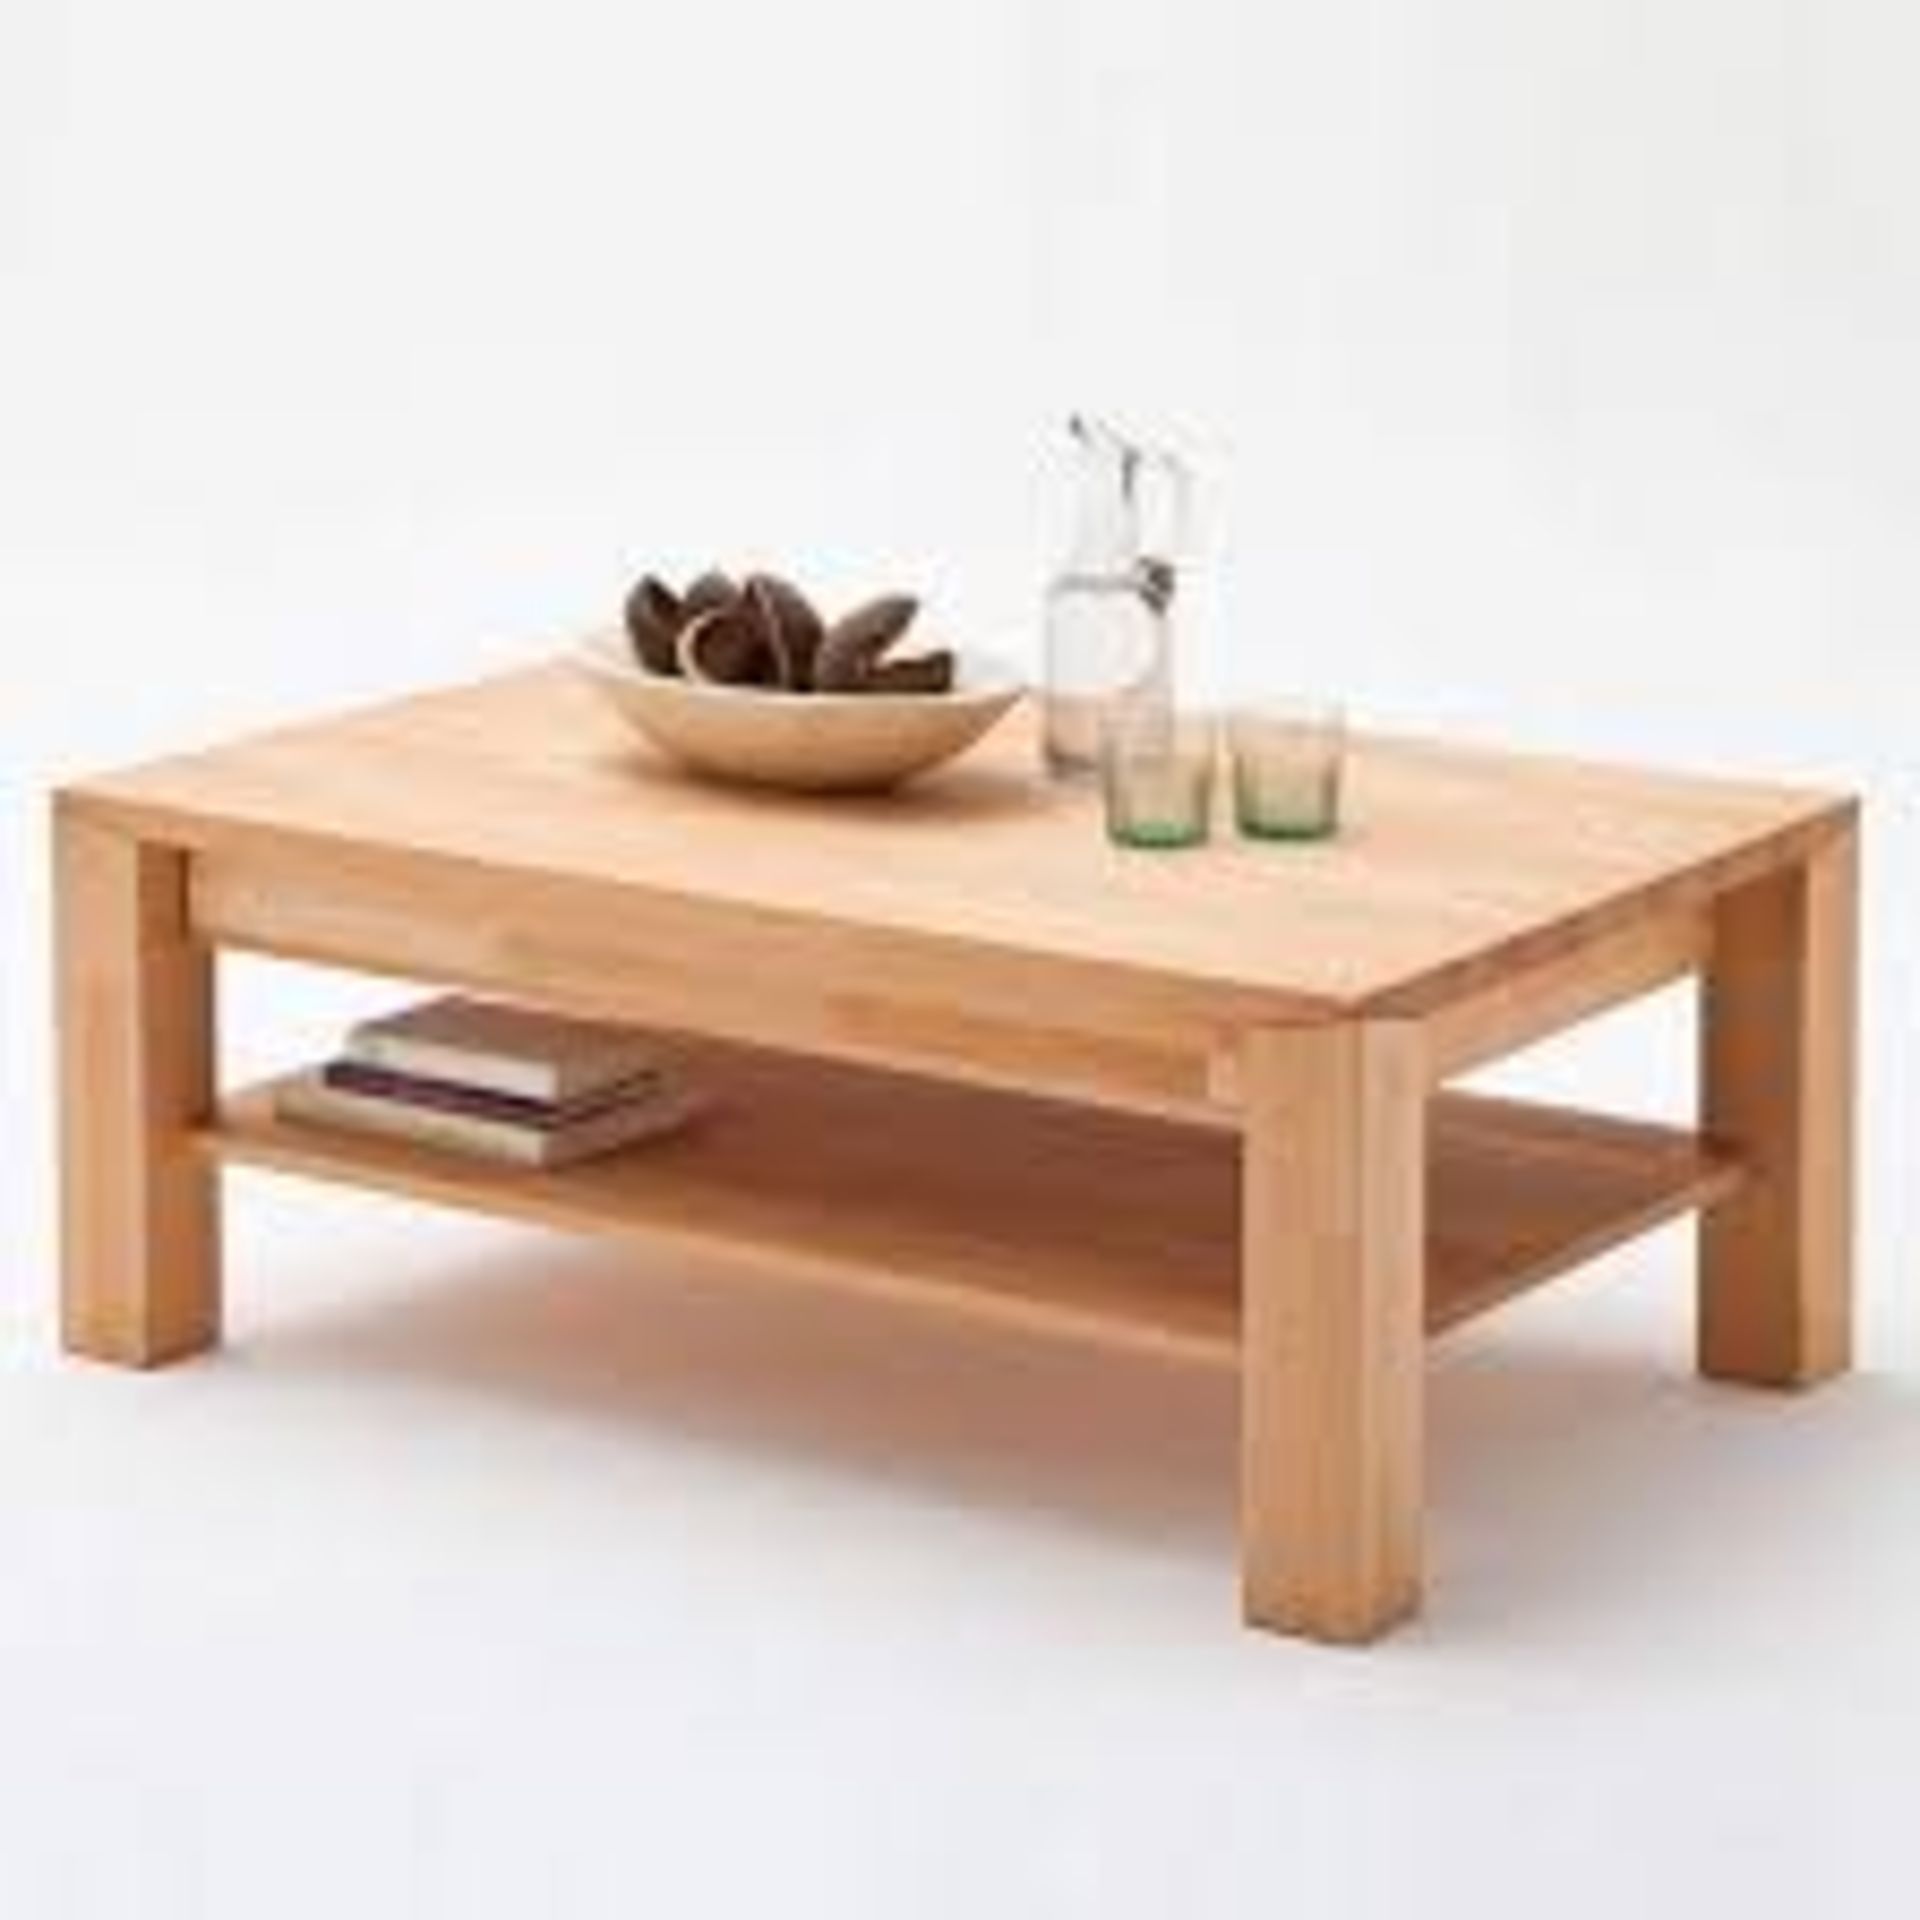 Boxed Messina Solid Beech Coffee Table RRP £320